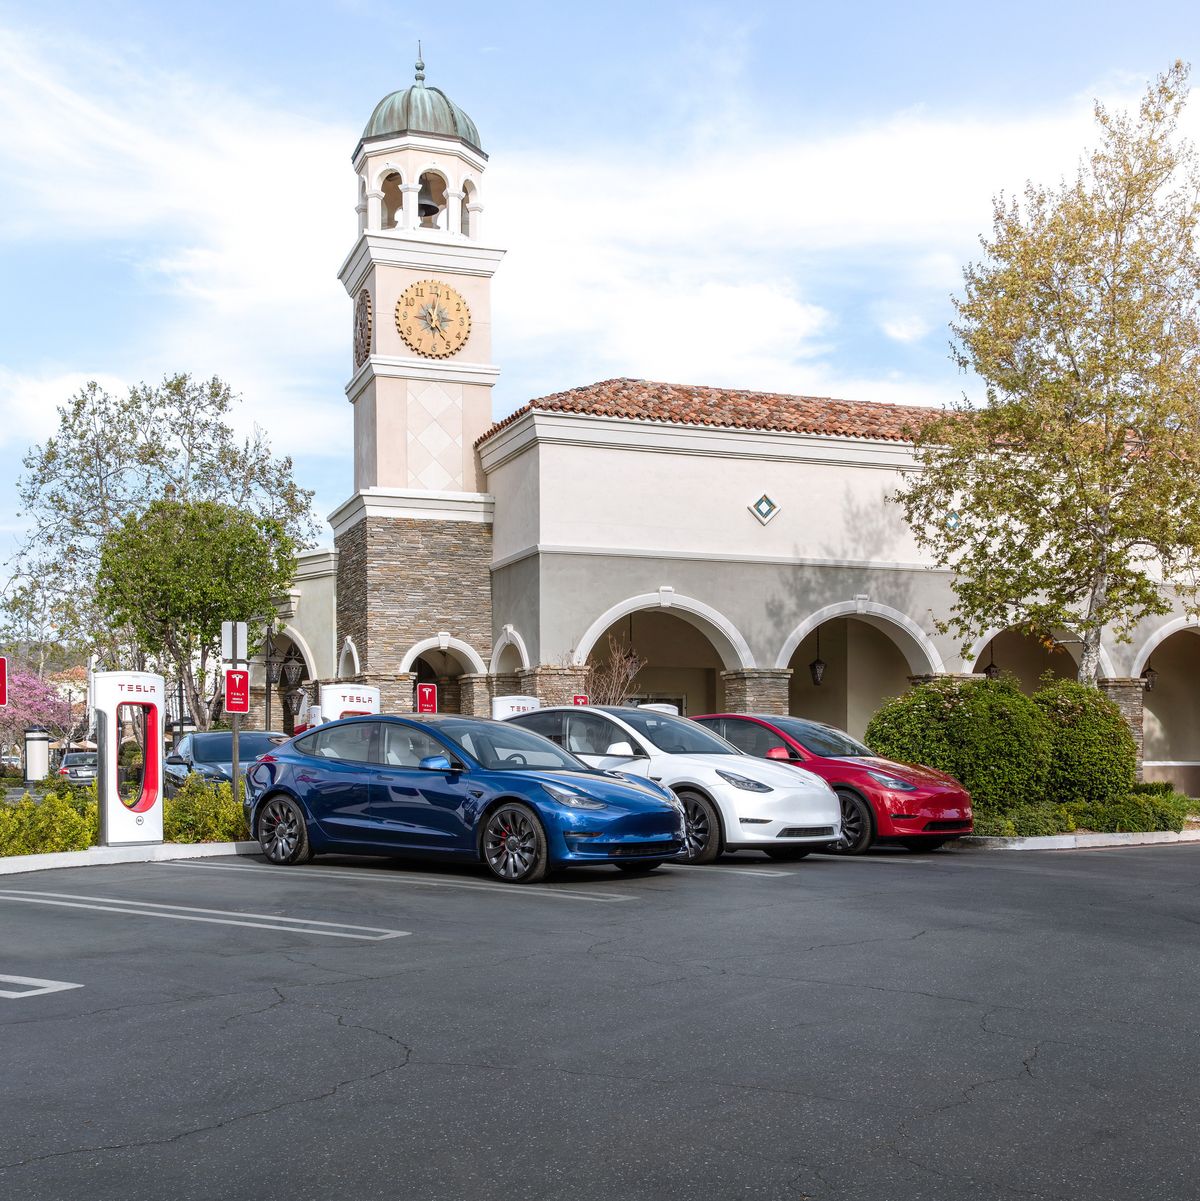 Tesla's home charging station receives highest customer satisfaction score  in J.D Power study